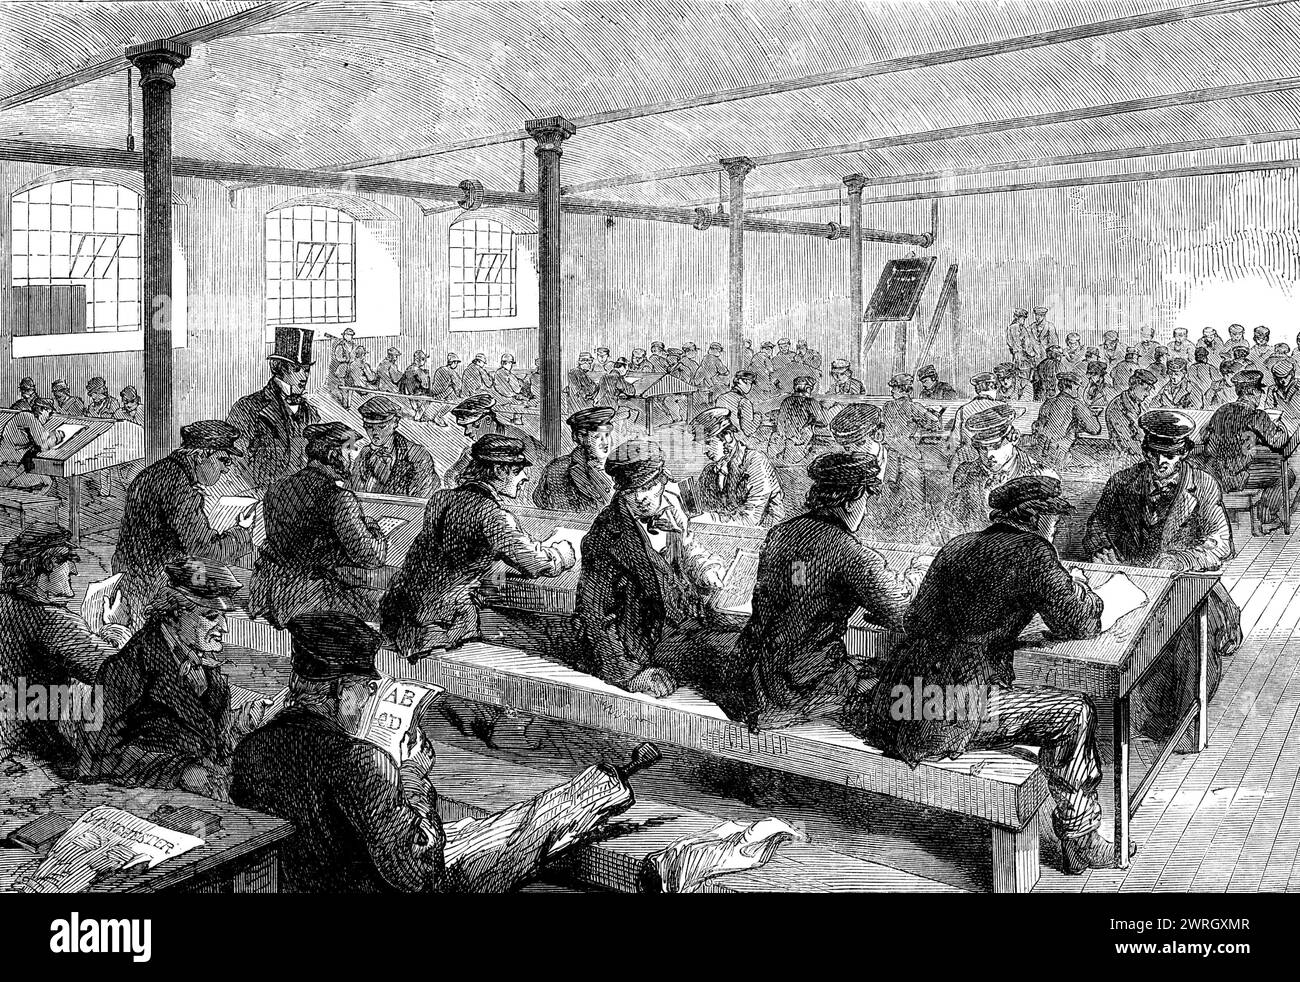 The Cotton Famine: school for mill operatives at Mr. Stirling's mill, Lower Mosley-street, Manchester, 1862. Literacy classes for unemployed Lancashire textiles workers. 'While speaking of Hulme, I must mention the institute for men, supported by the Township Relief Committee. An old mill with three floors has been lent for the purpose, where about 400 men are congregated to read and write from nine to six o'clock five days a week, under proper teachers. Two meals a day are provided for them on the foundation floor, while on the two others, supplied with tables and educational requisites, they Stock Photo